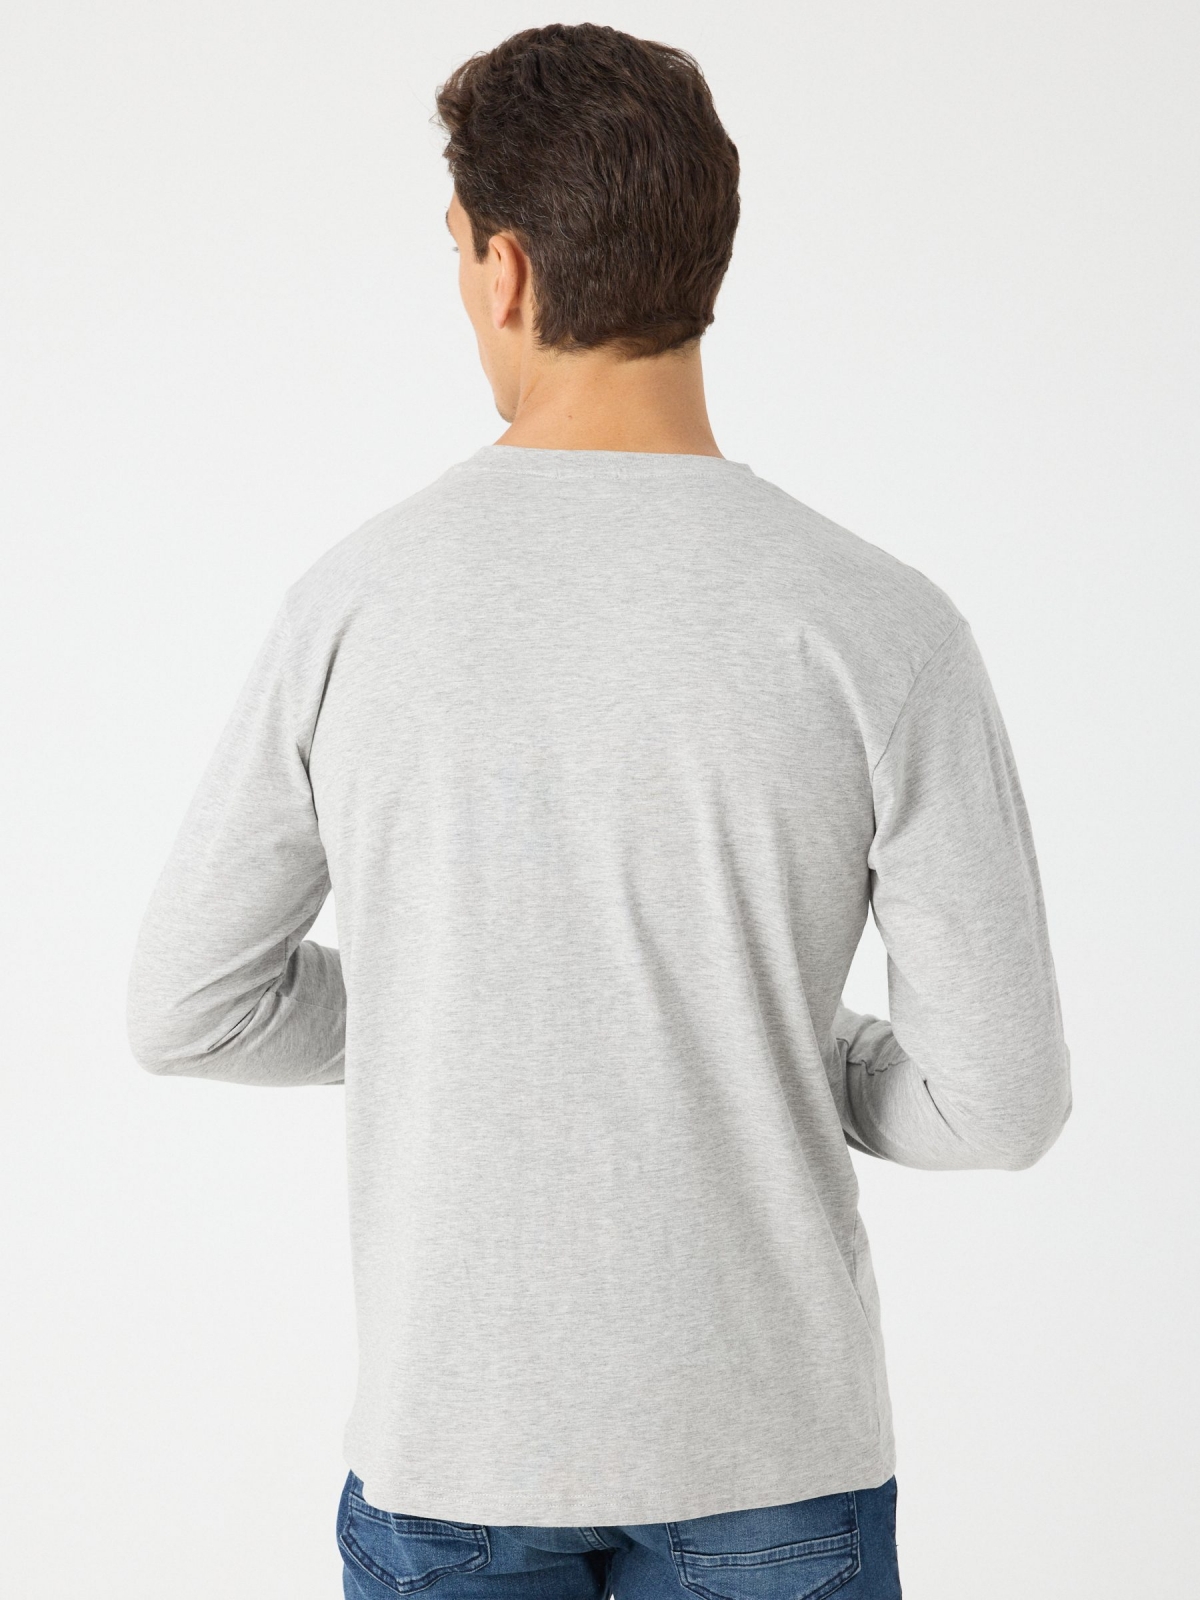 Snoopy long-sleeve t-shirt grey middle back view